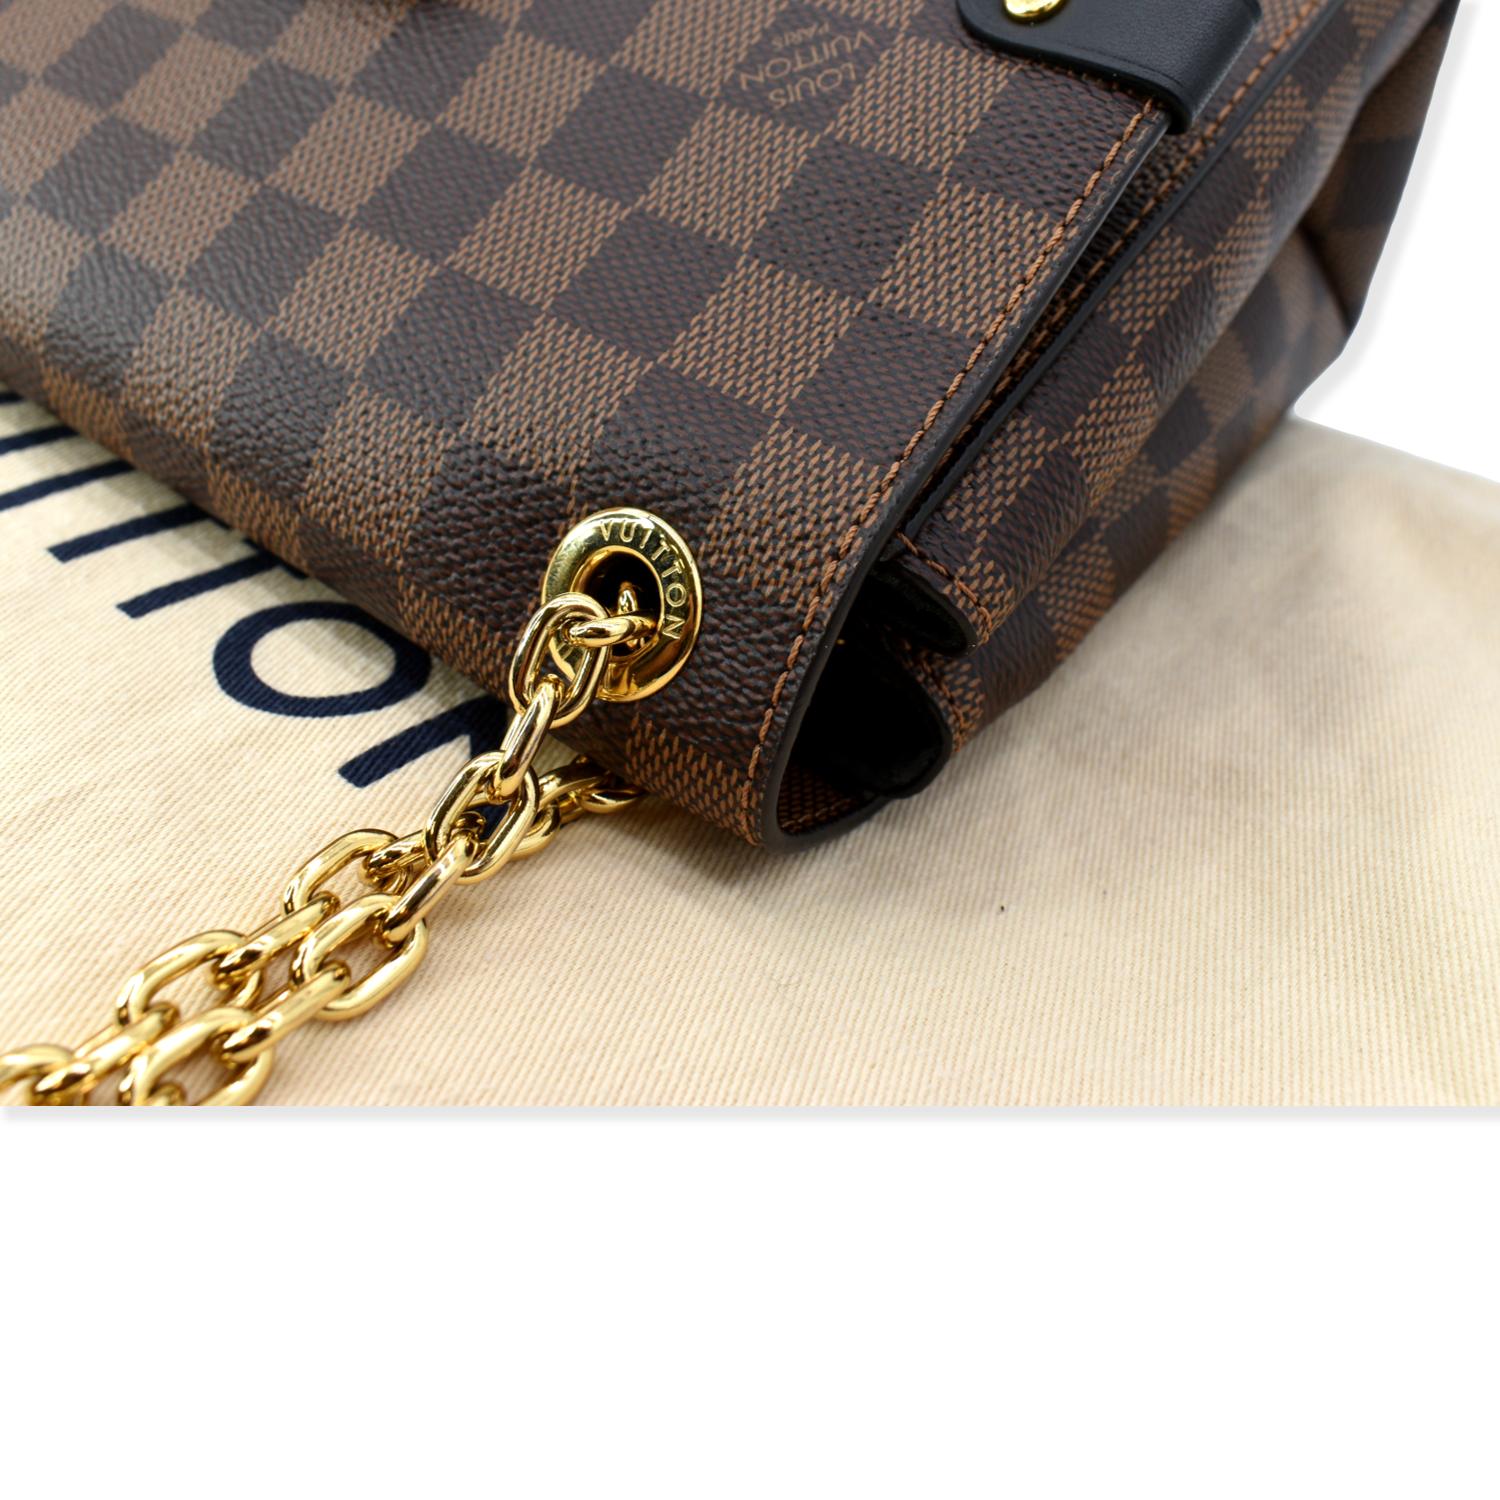 Vavin Chain Wallet Damier Ebene - Wallets and Small Leather Goods